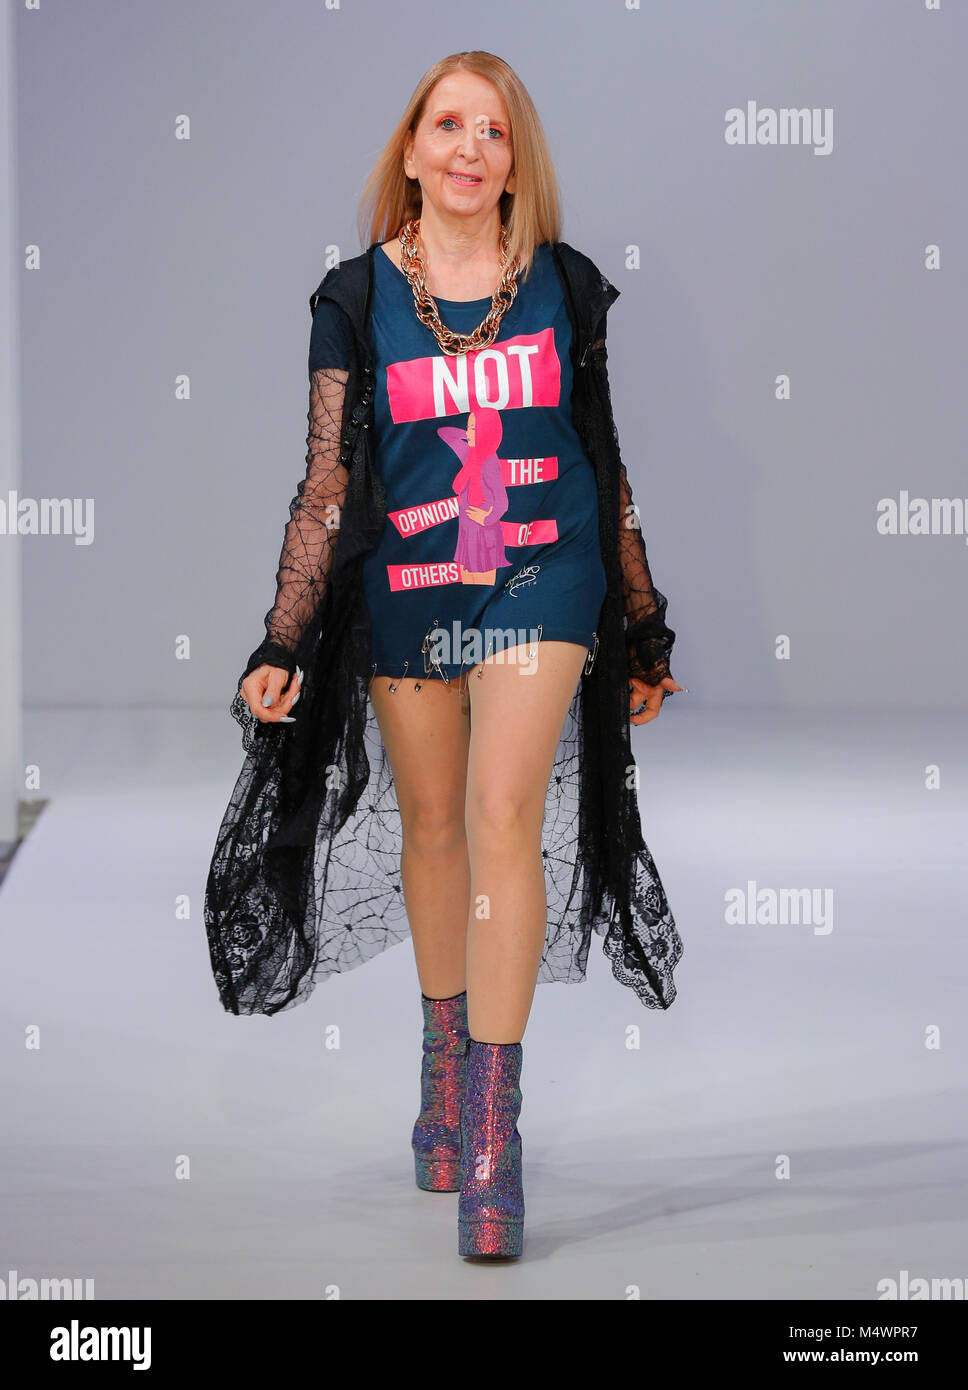 Sunday 18th of February 2018, London, United Kingdom, Europe. Afton McKeith launching her own t-shirt brand during London Fashion Week Fashion Finest together with her mom Gilian McKeith  walking on a runway with other models Credit: catwalking/runways/Alamy Live News Stock Photo